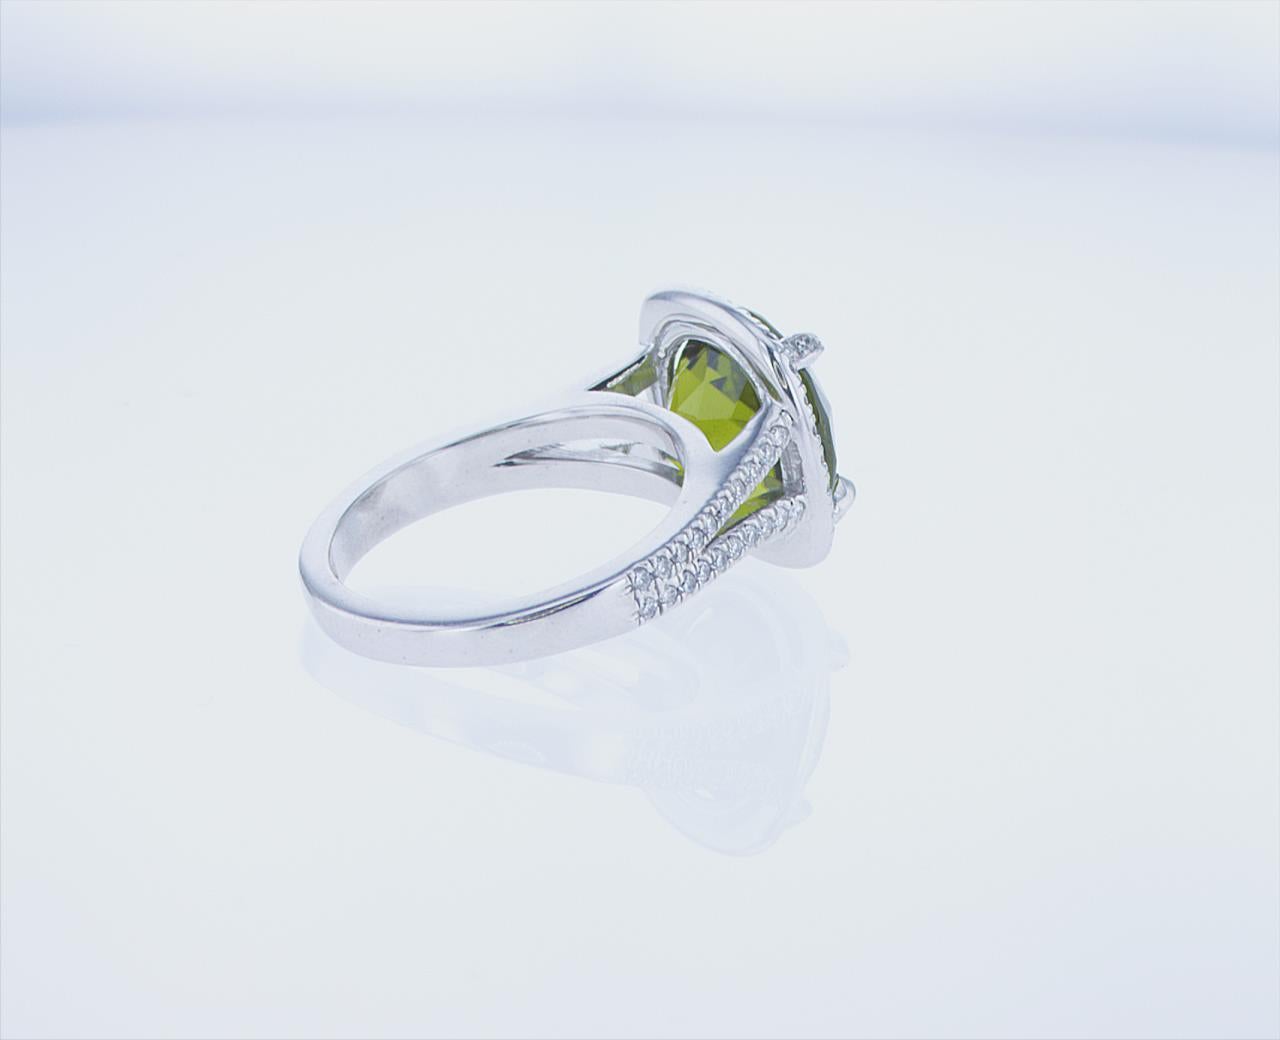 Modern 6.38ct Cushion Shape Peridot Cocktail Ring in 18k White Gold with Palladium For Sale